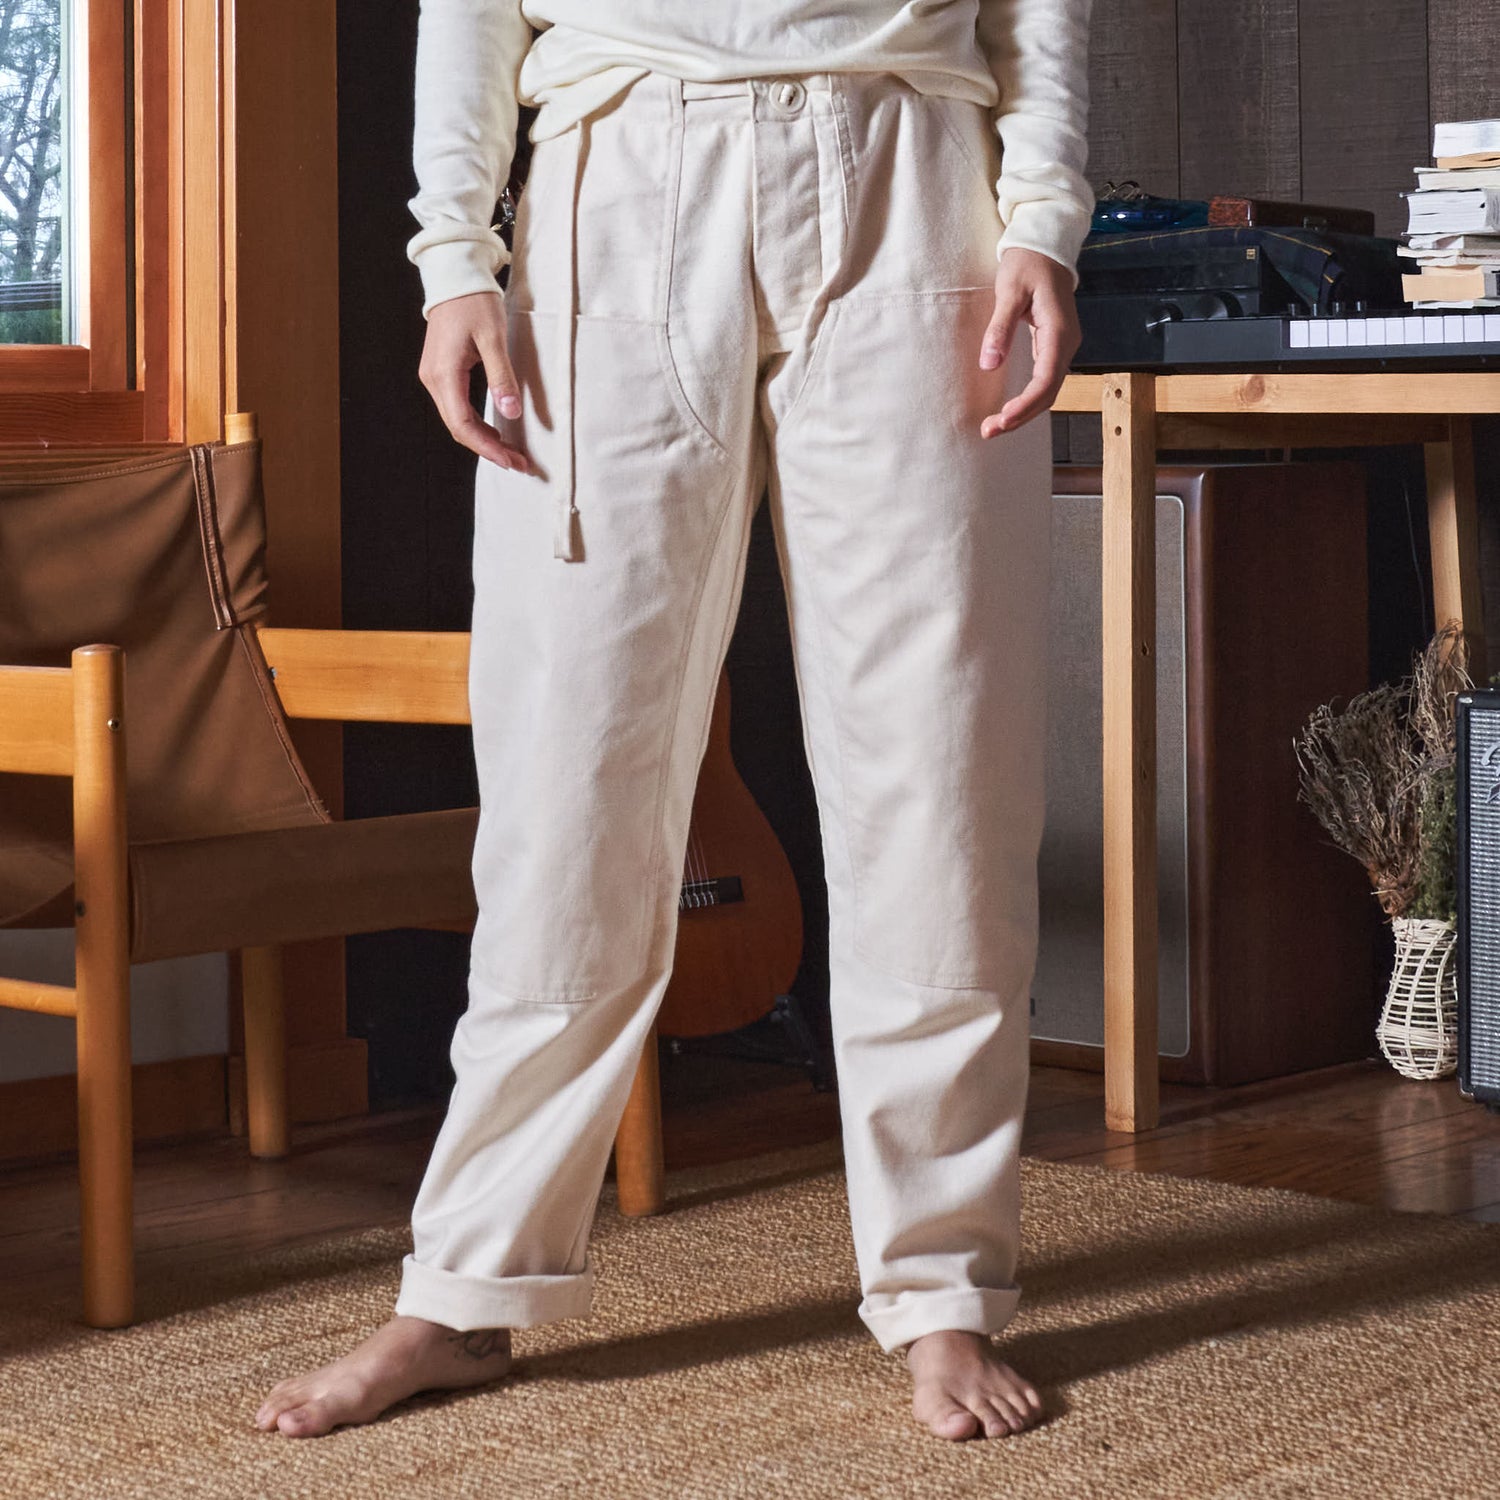 All We Remember  8-Pocket Maker Pants in Undyed Organic Cotton